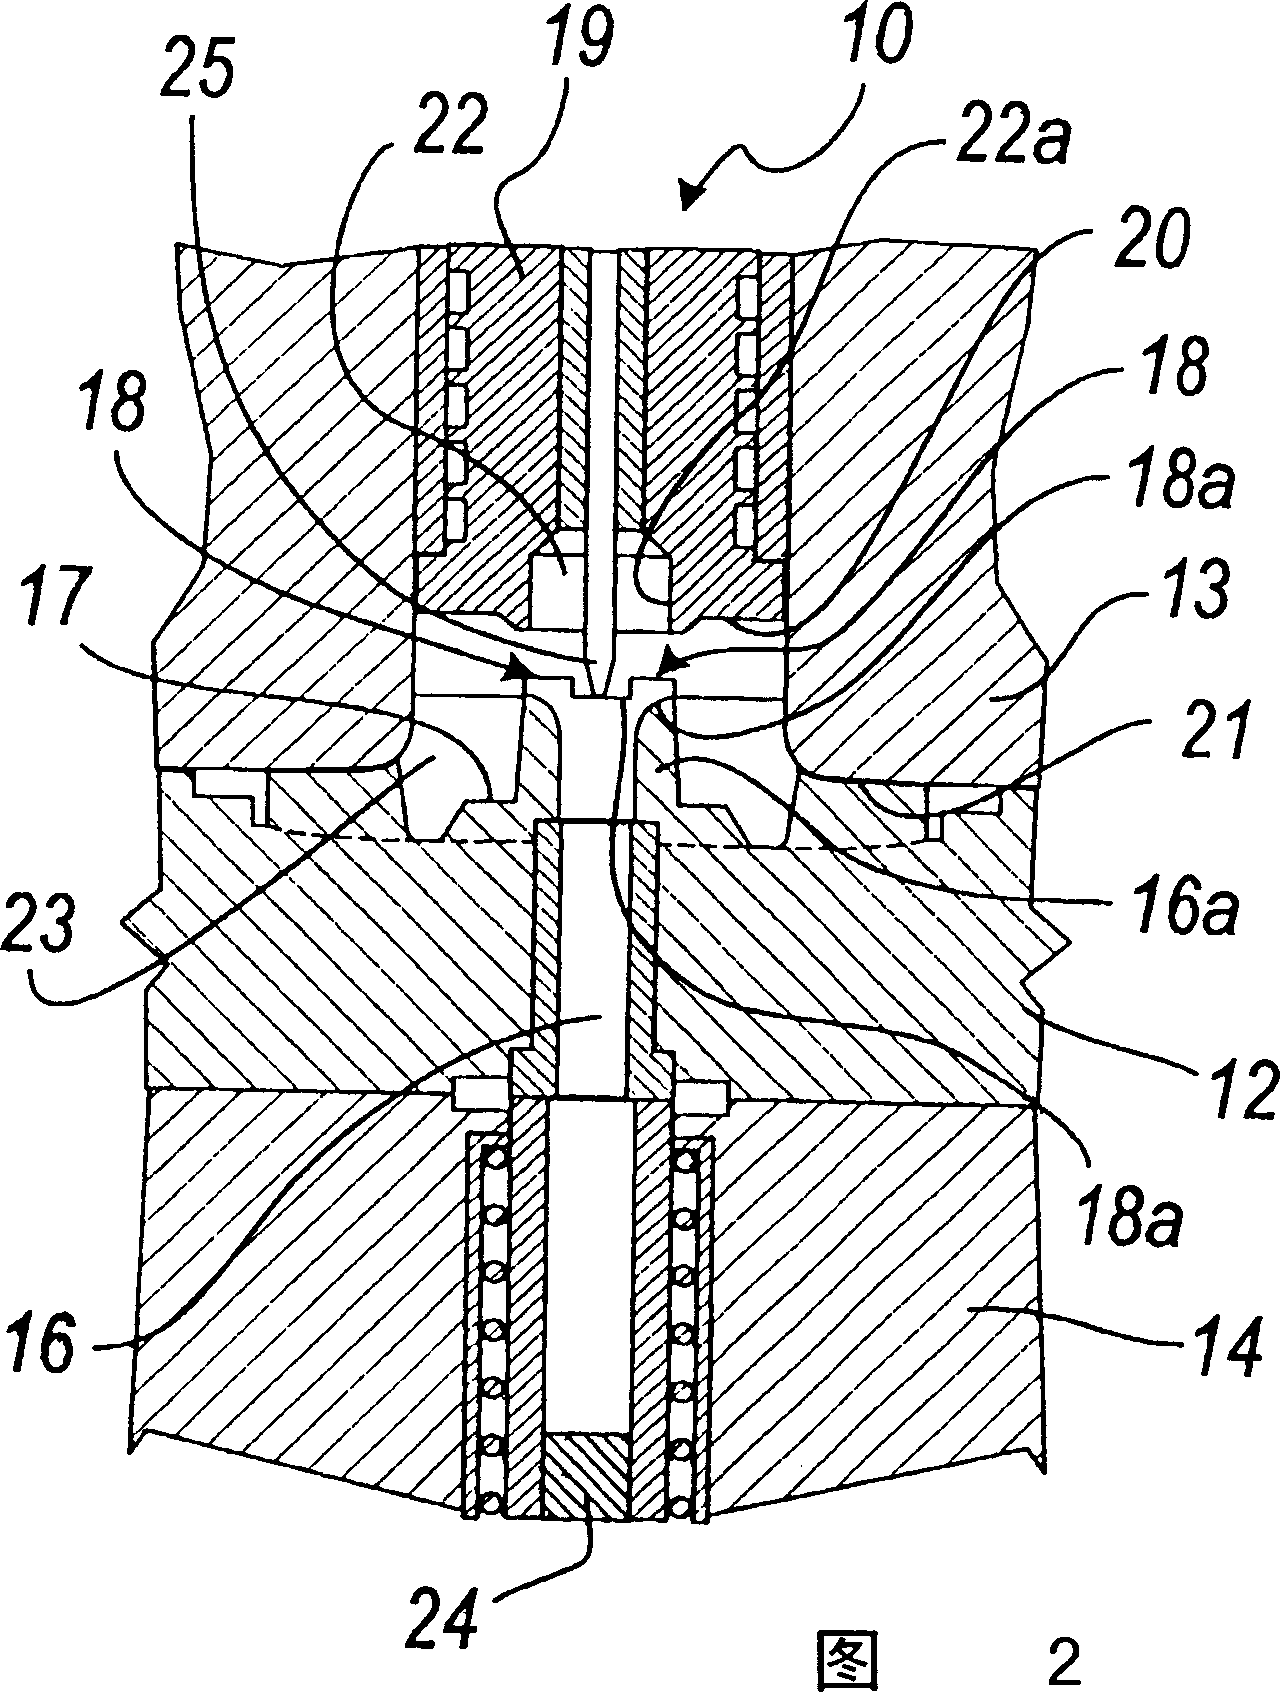 Apparatus for manufacturing articles made of light alloys and the like, and method performed by the apparatus